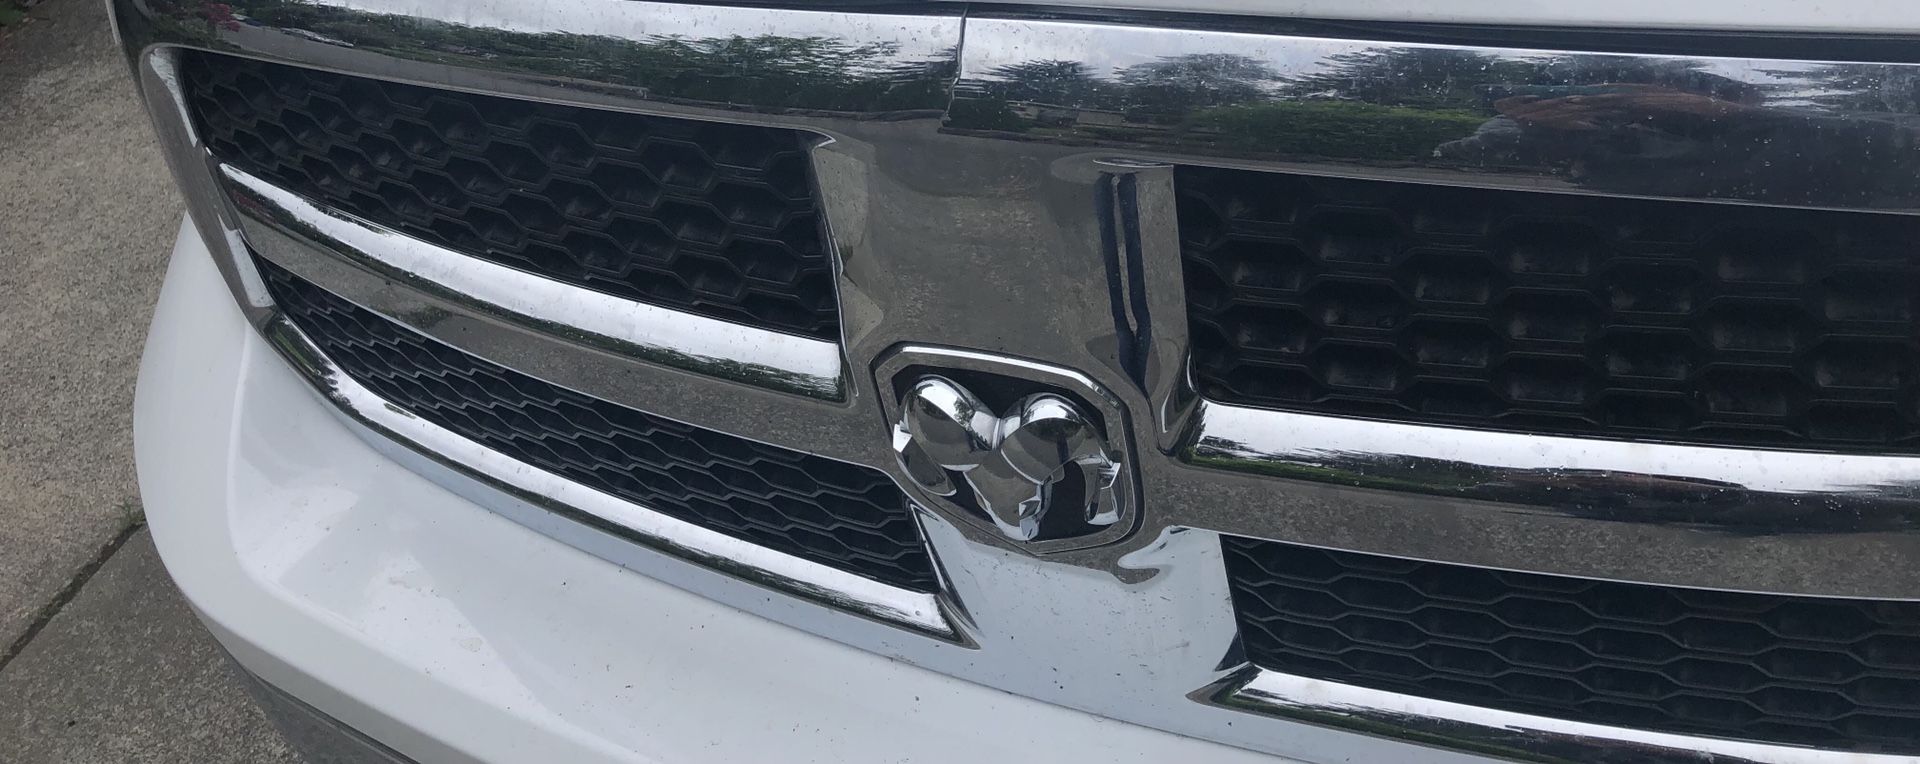 2016 Ram 1500 Front Chrome Grill